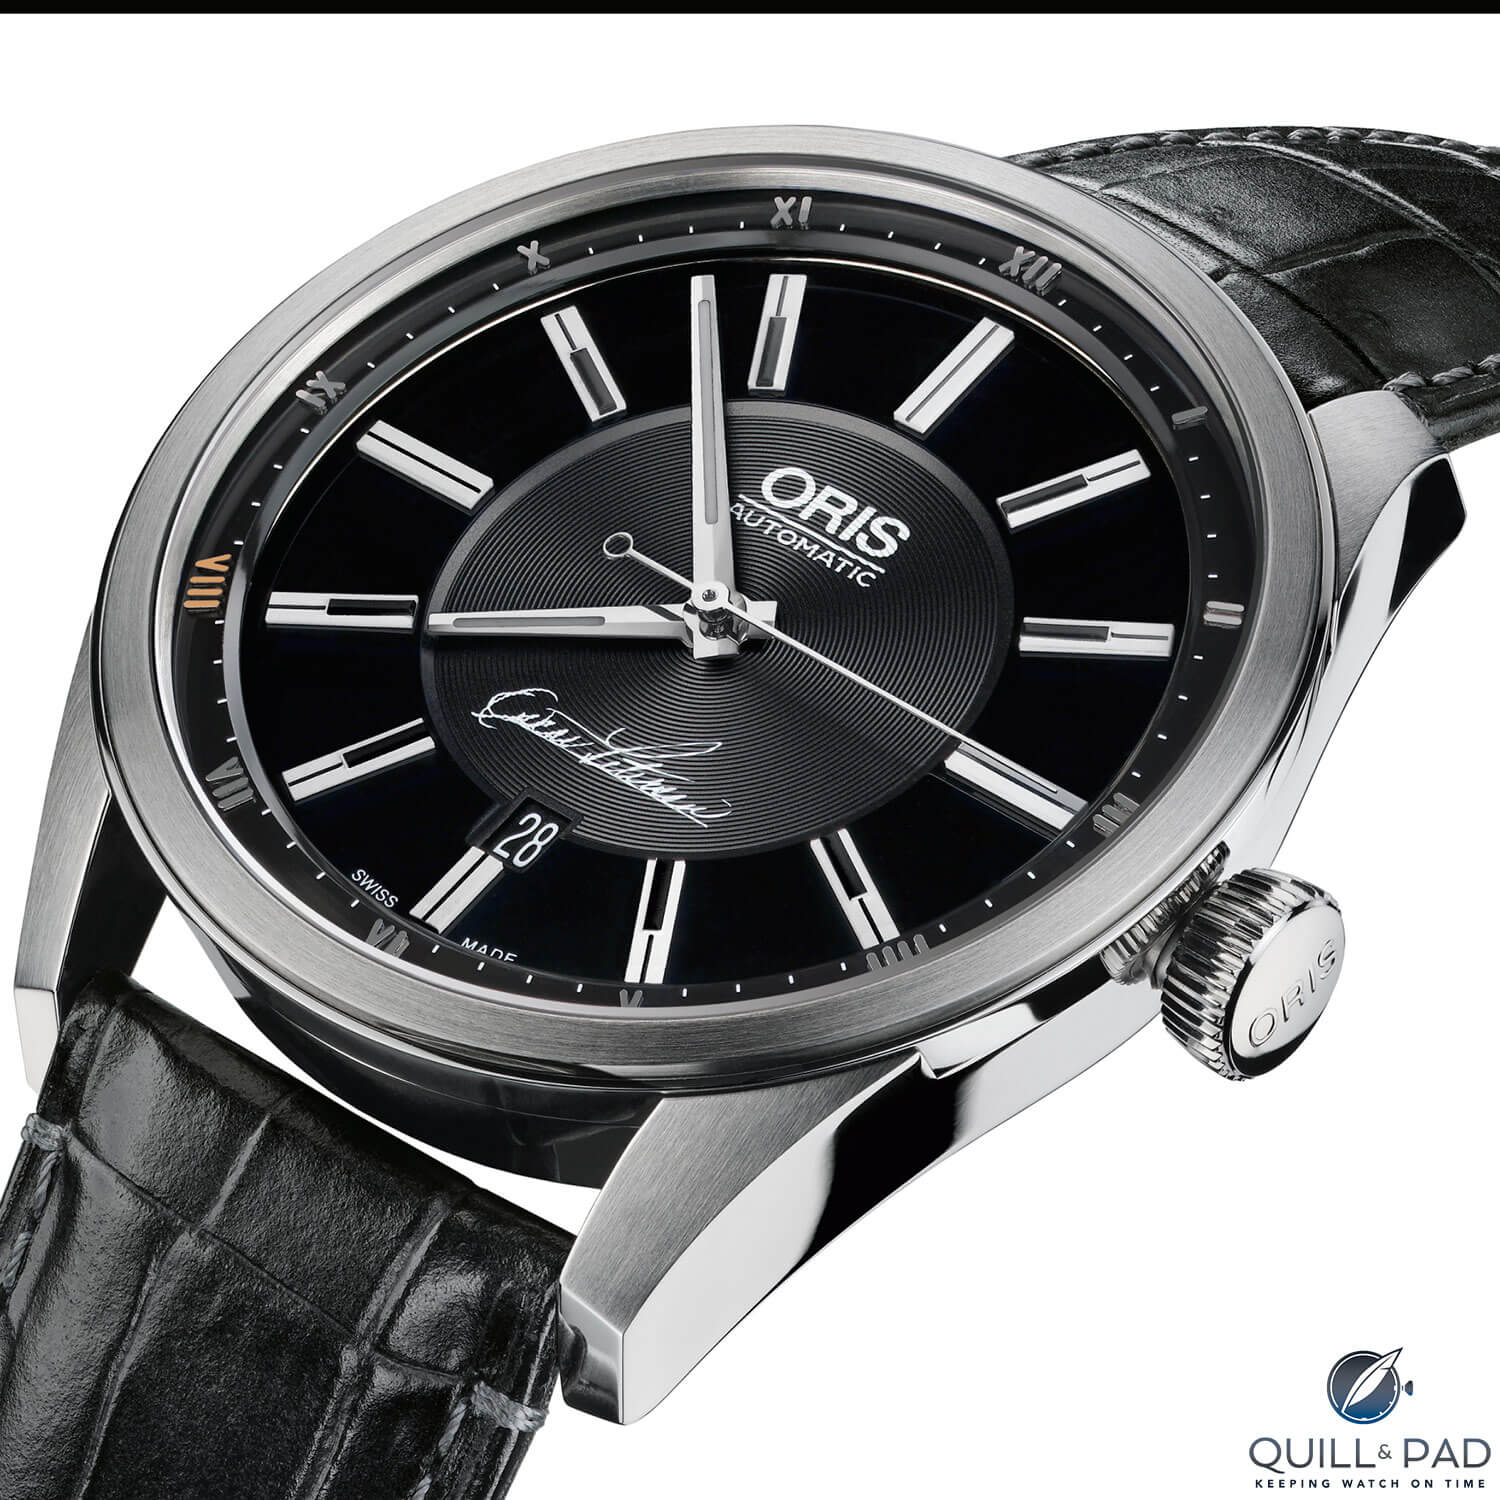 Oris’ 2010 limited edition in honor of Oscar Peterson